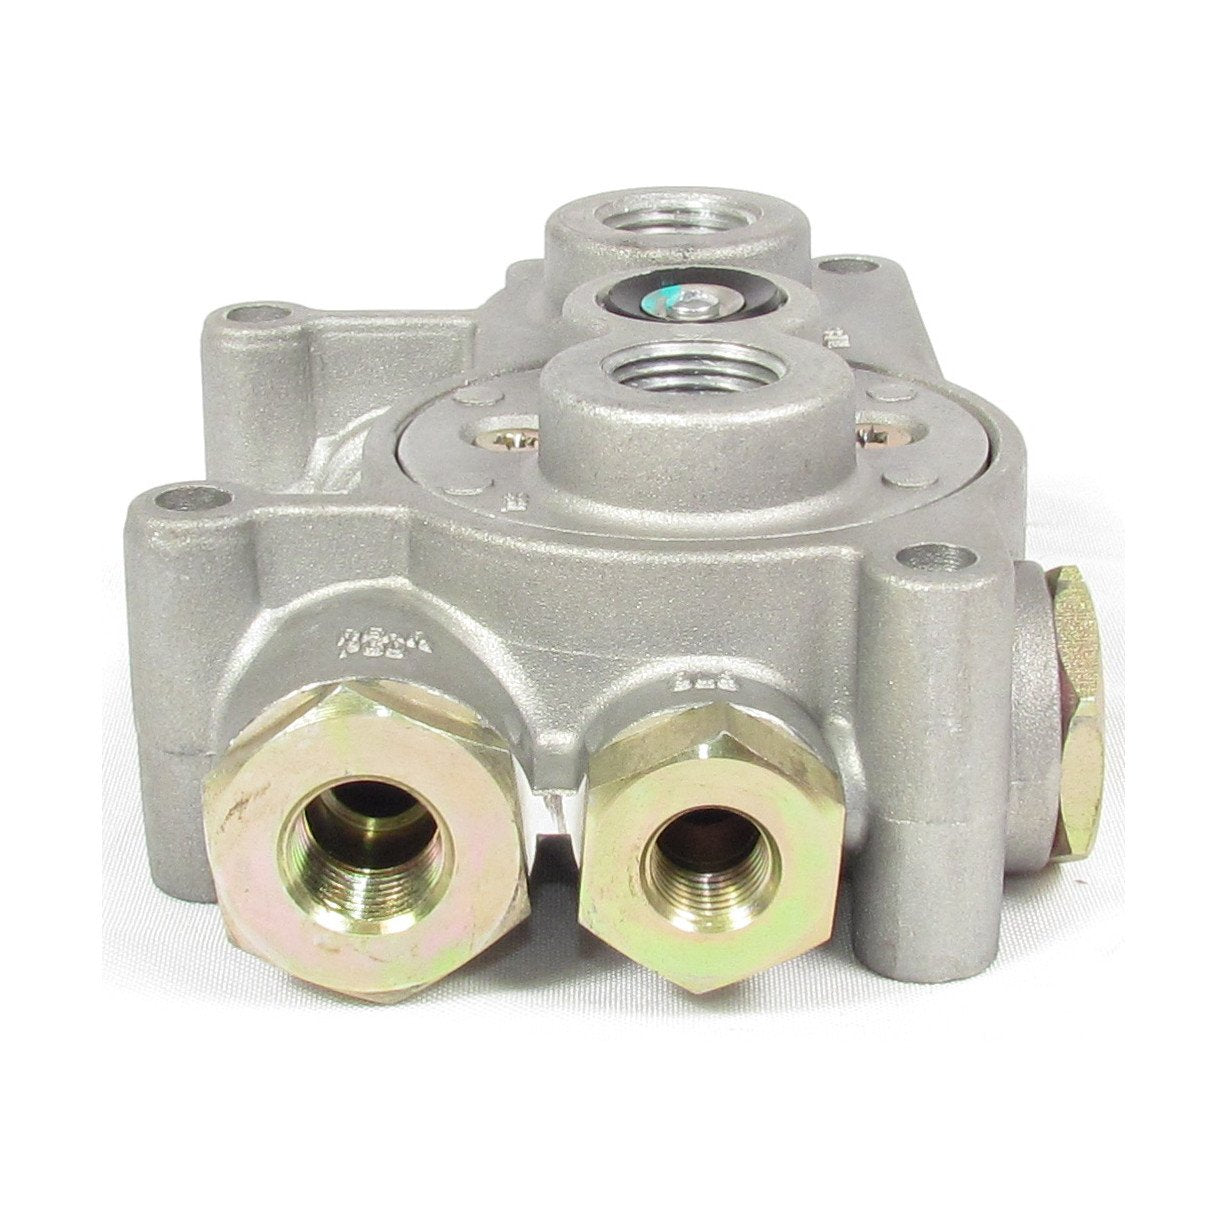 F224676 | TP-5 TRACTOR PROTECTION VALVE | Replace 288605 | 20QE3234 | LPV-3455